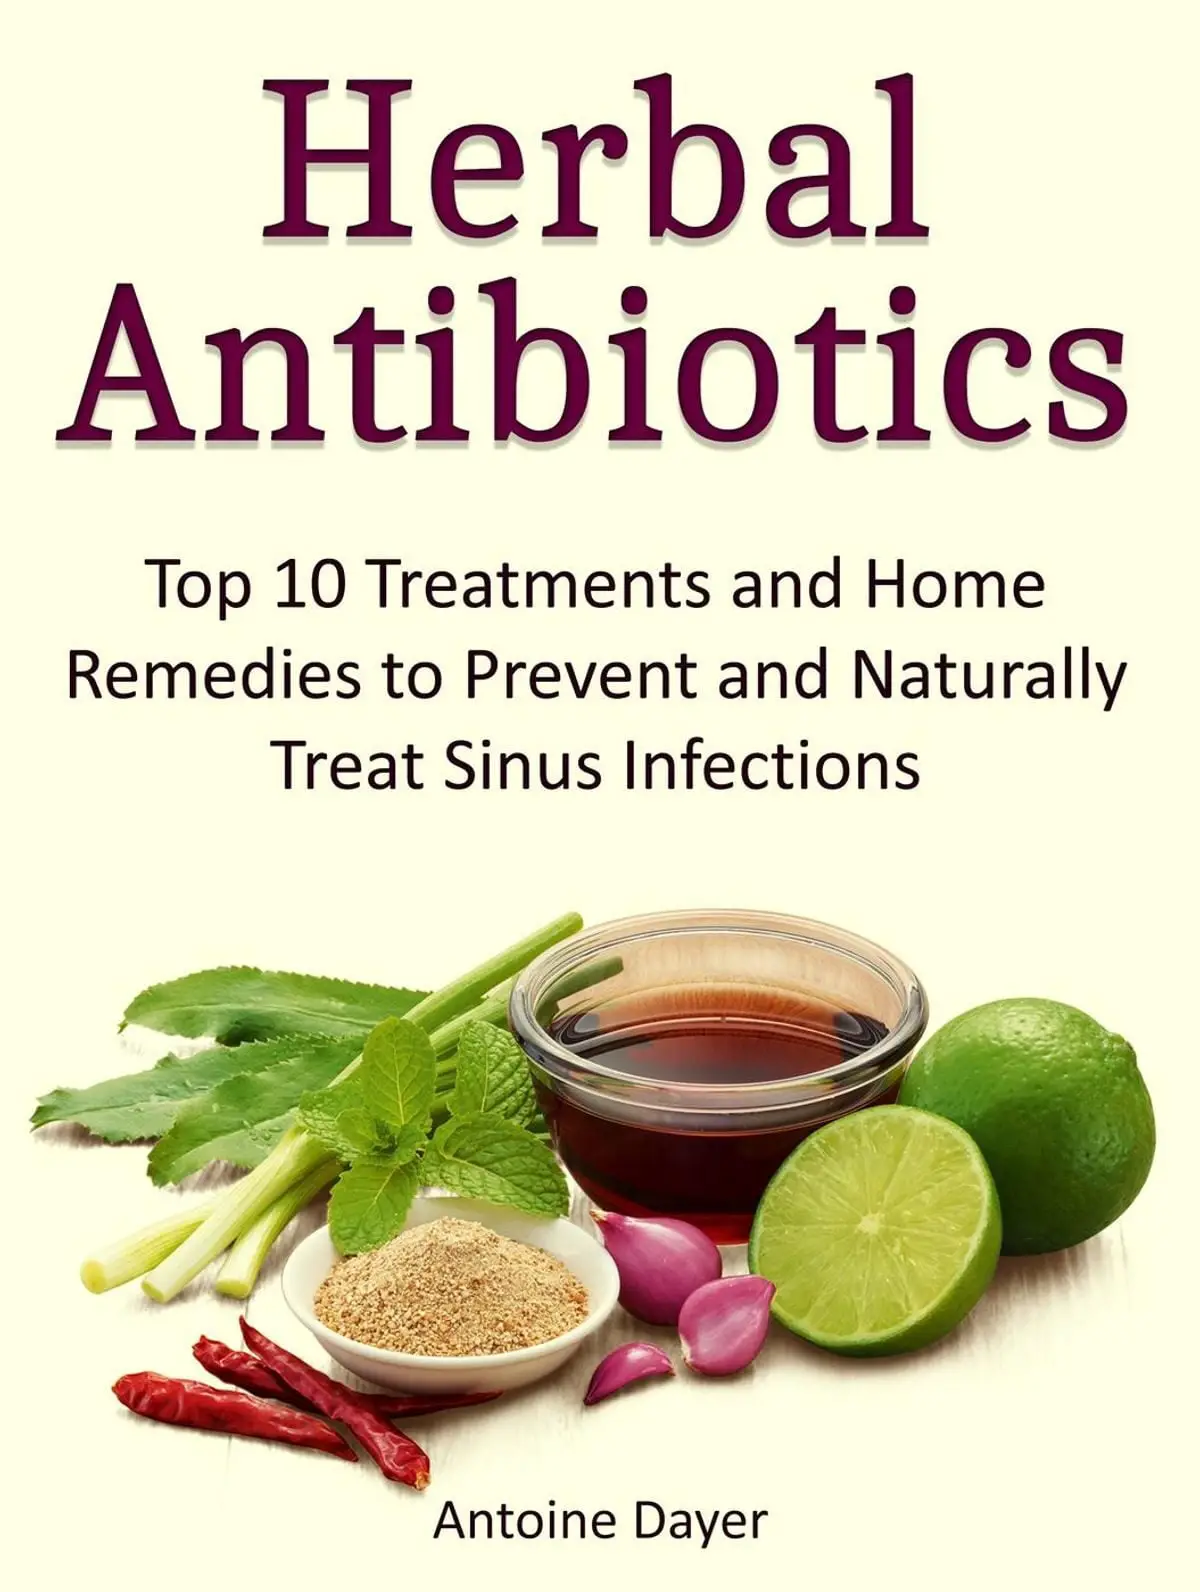 herbal-antibiotics-top-10-treatments-and-home-remedies-to-prevent-and-naturally-treat-sinus-infections-9497948